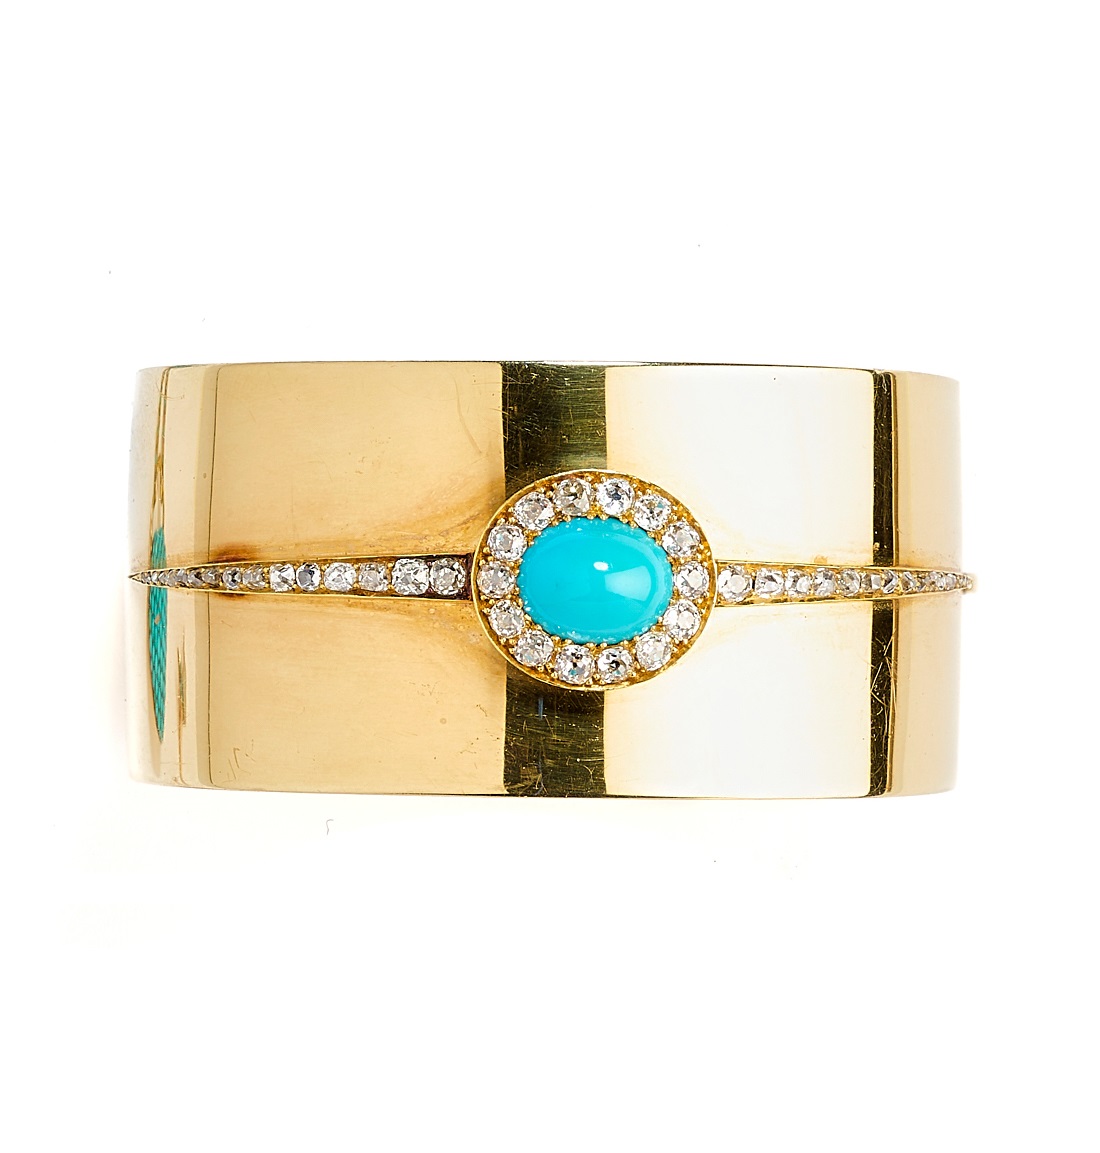 VICTORIAN GOLD, TURQUOISE AND DIAMOND BANGLE, 1870s